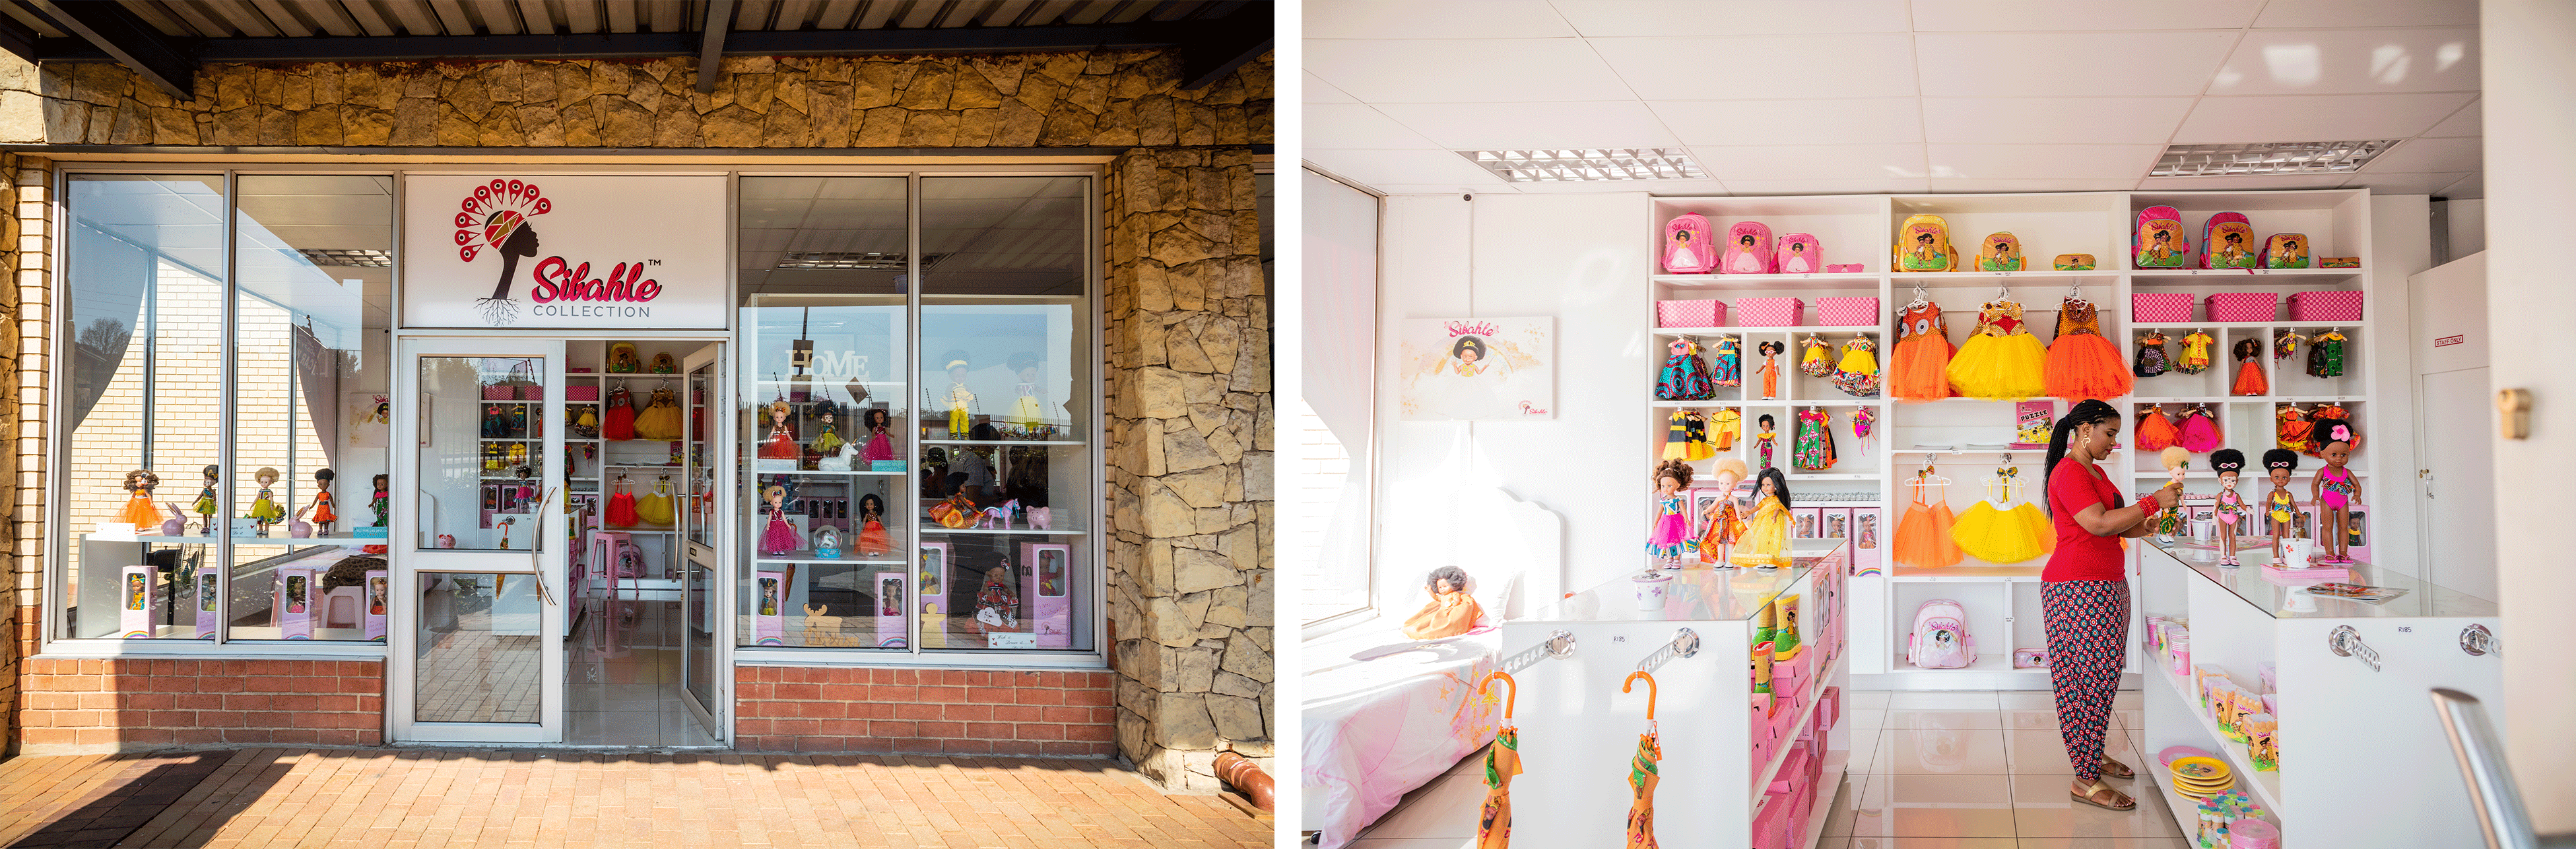 Two side-by-side photos. One of a store with glass windows. The other of the inside of the store, showing dolls for sale.